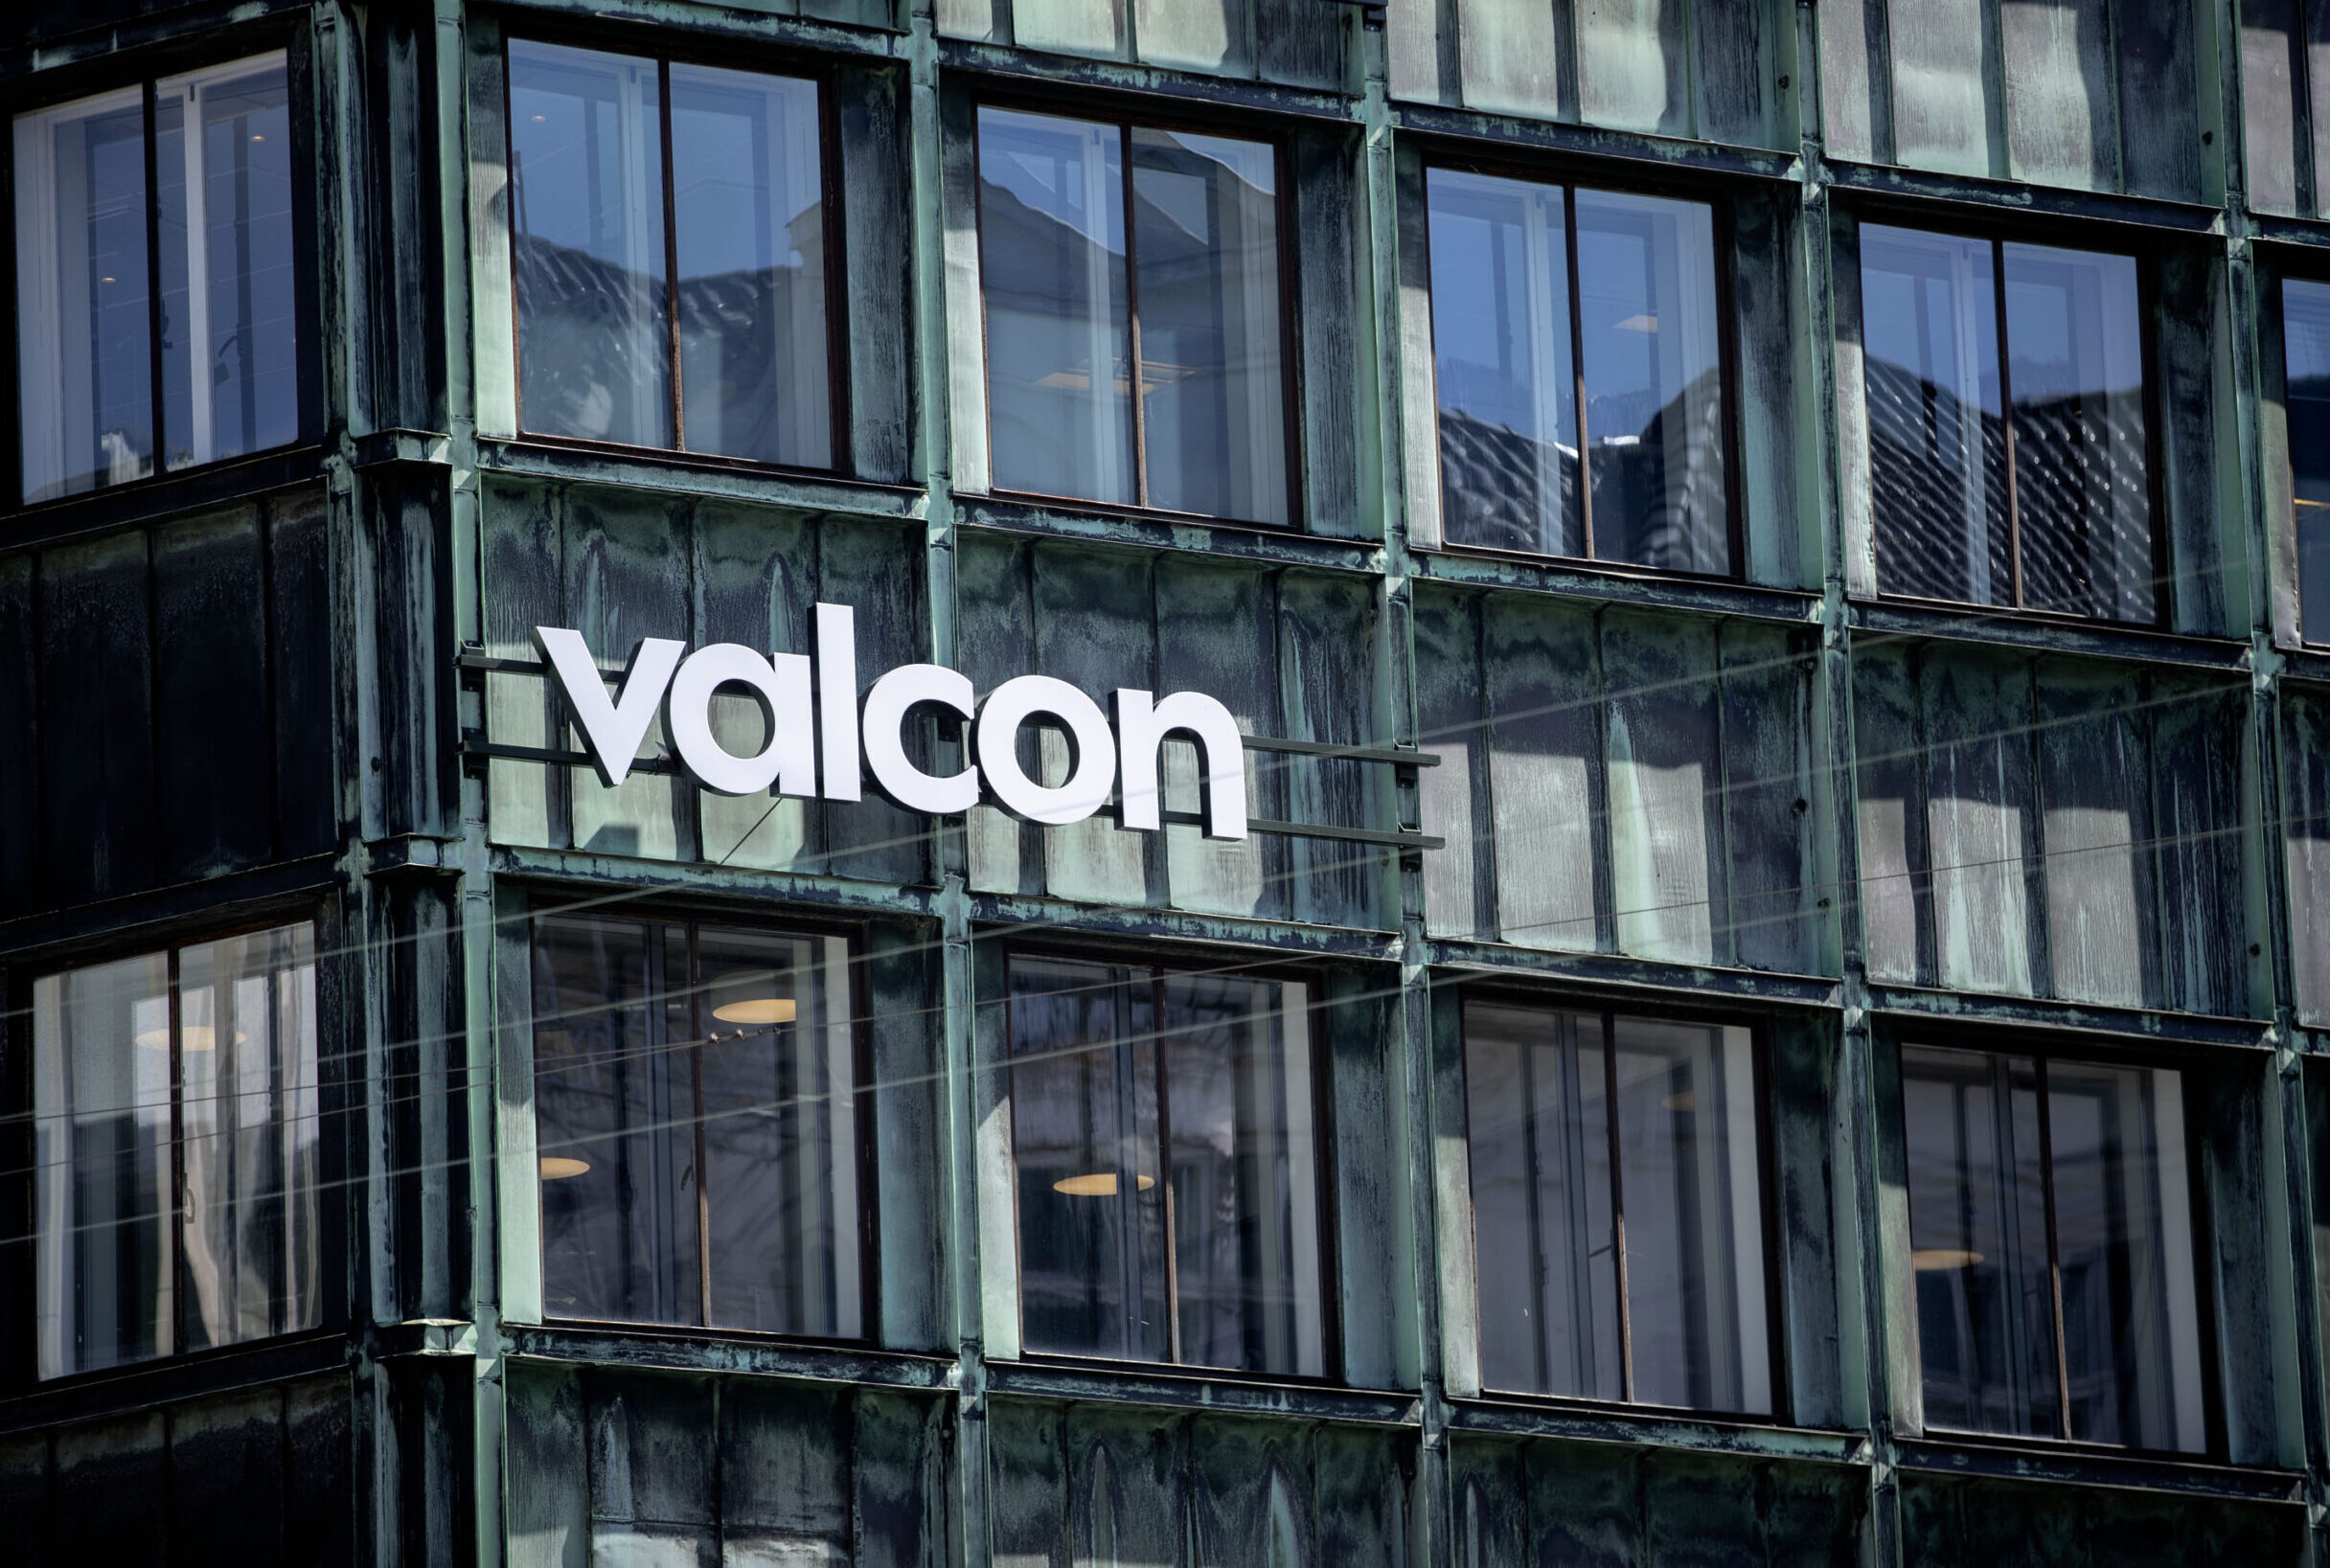 Valcon sign on building